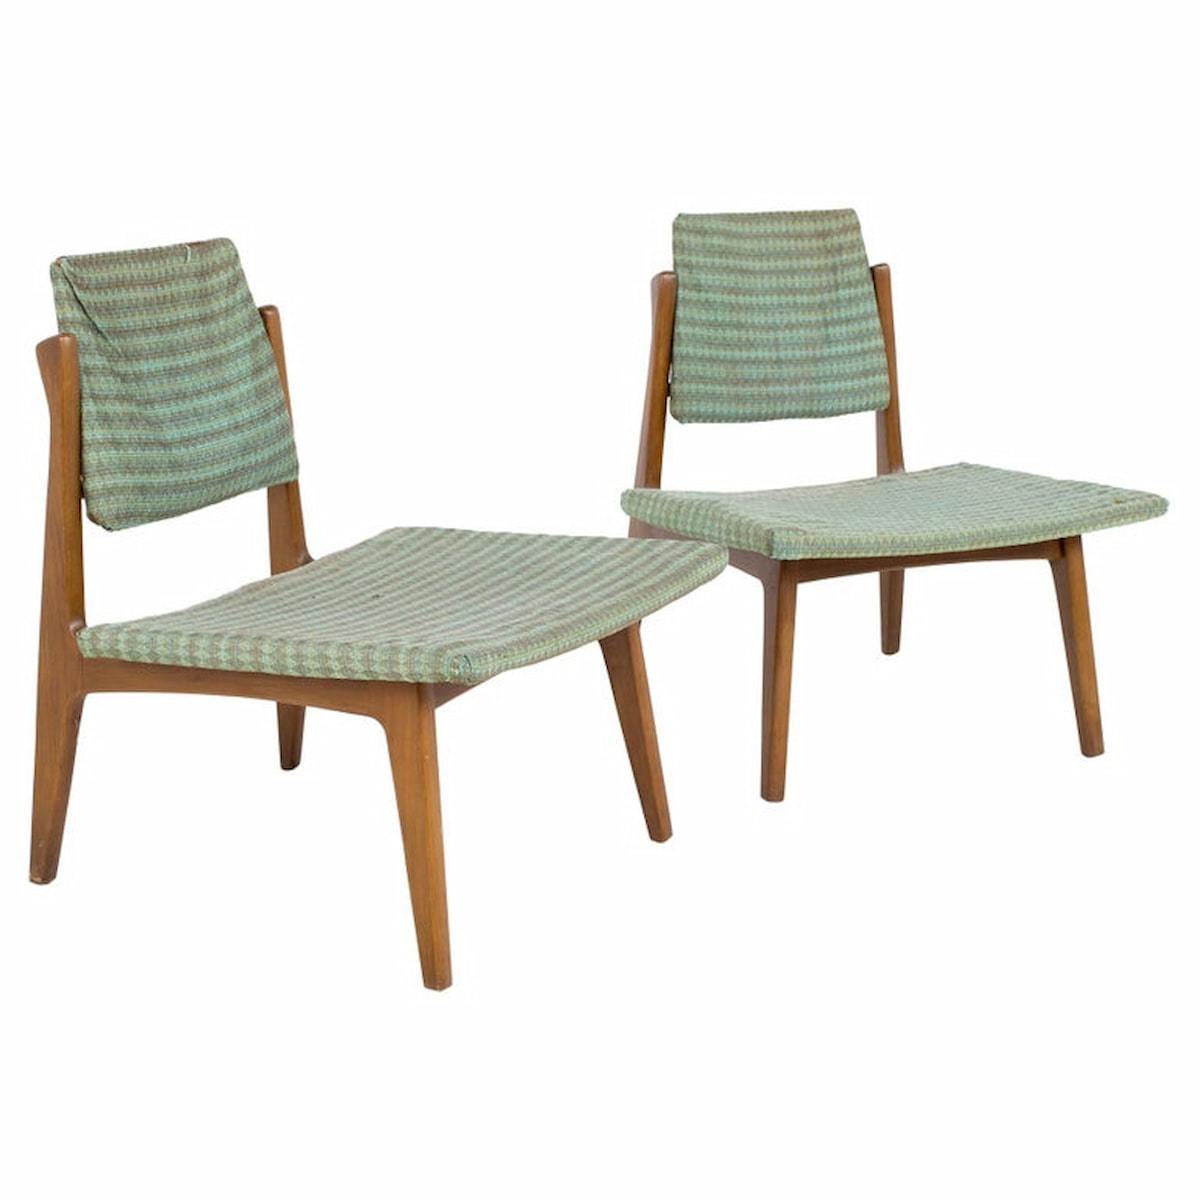 Wytheville Chair Company Mid Century Low Occasional Slipper Lounge Chairs - a Pair